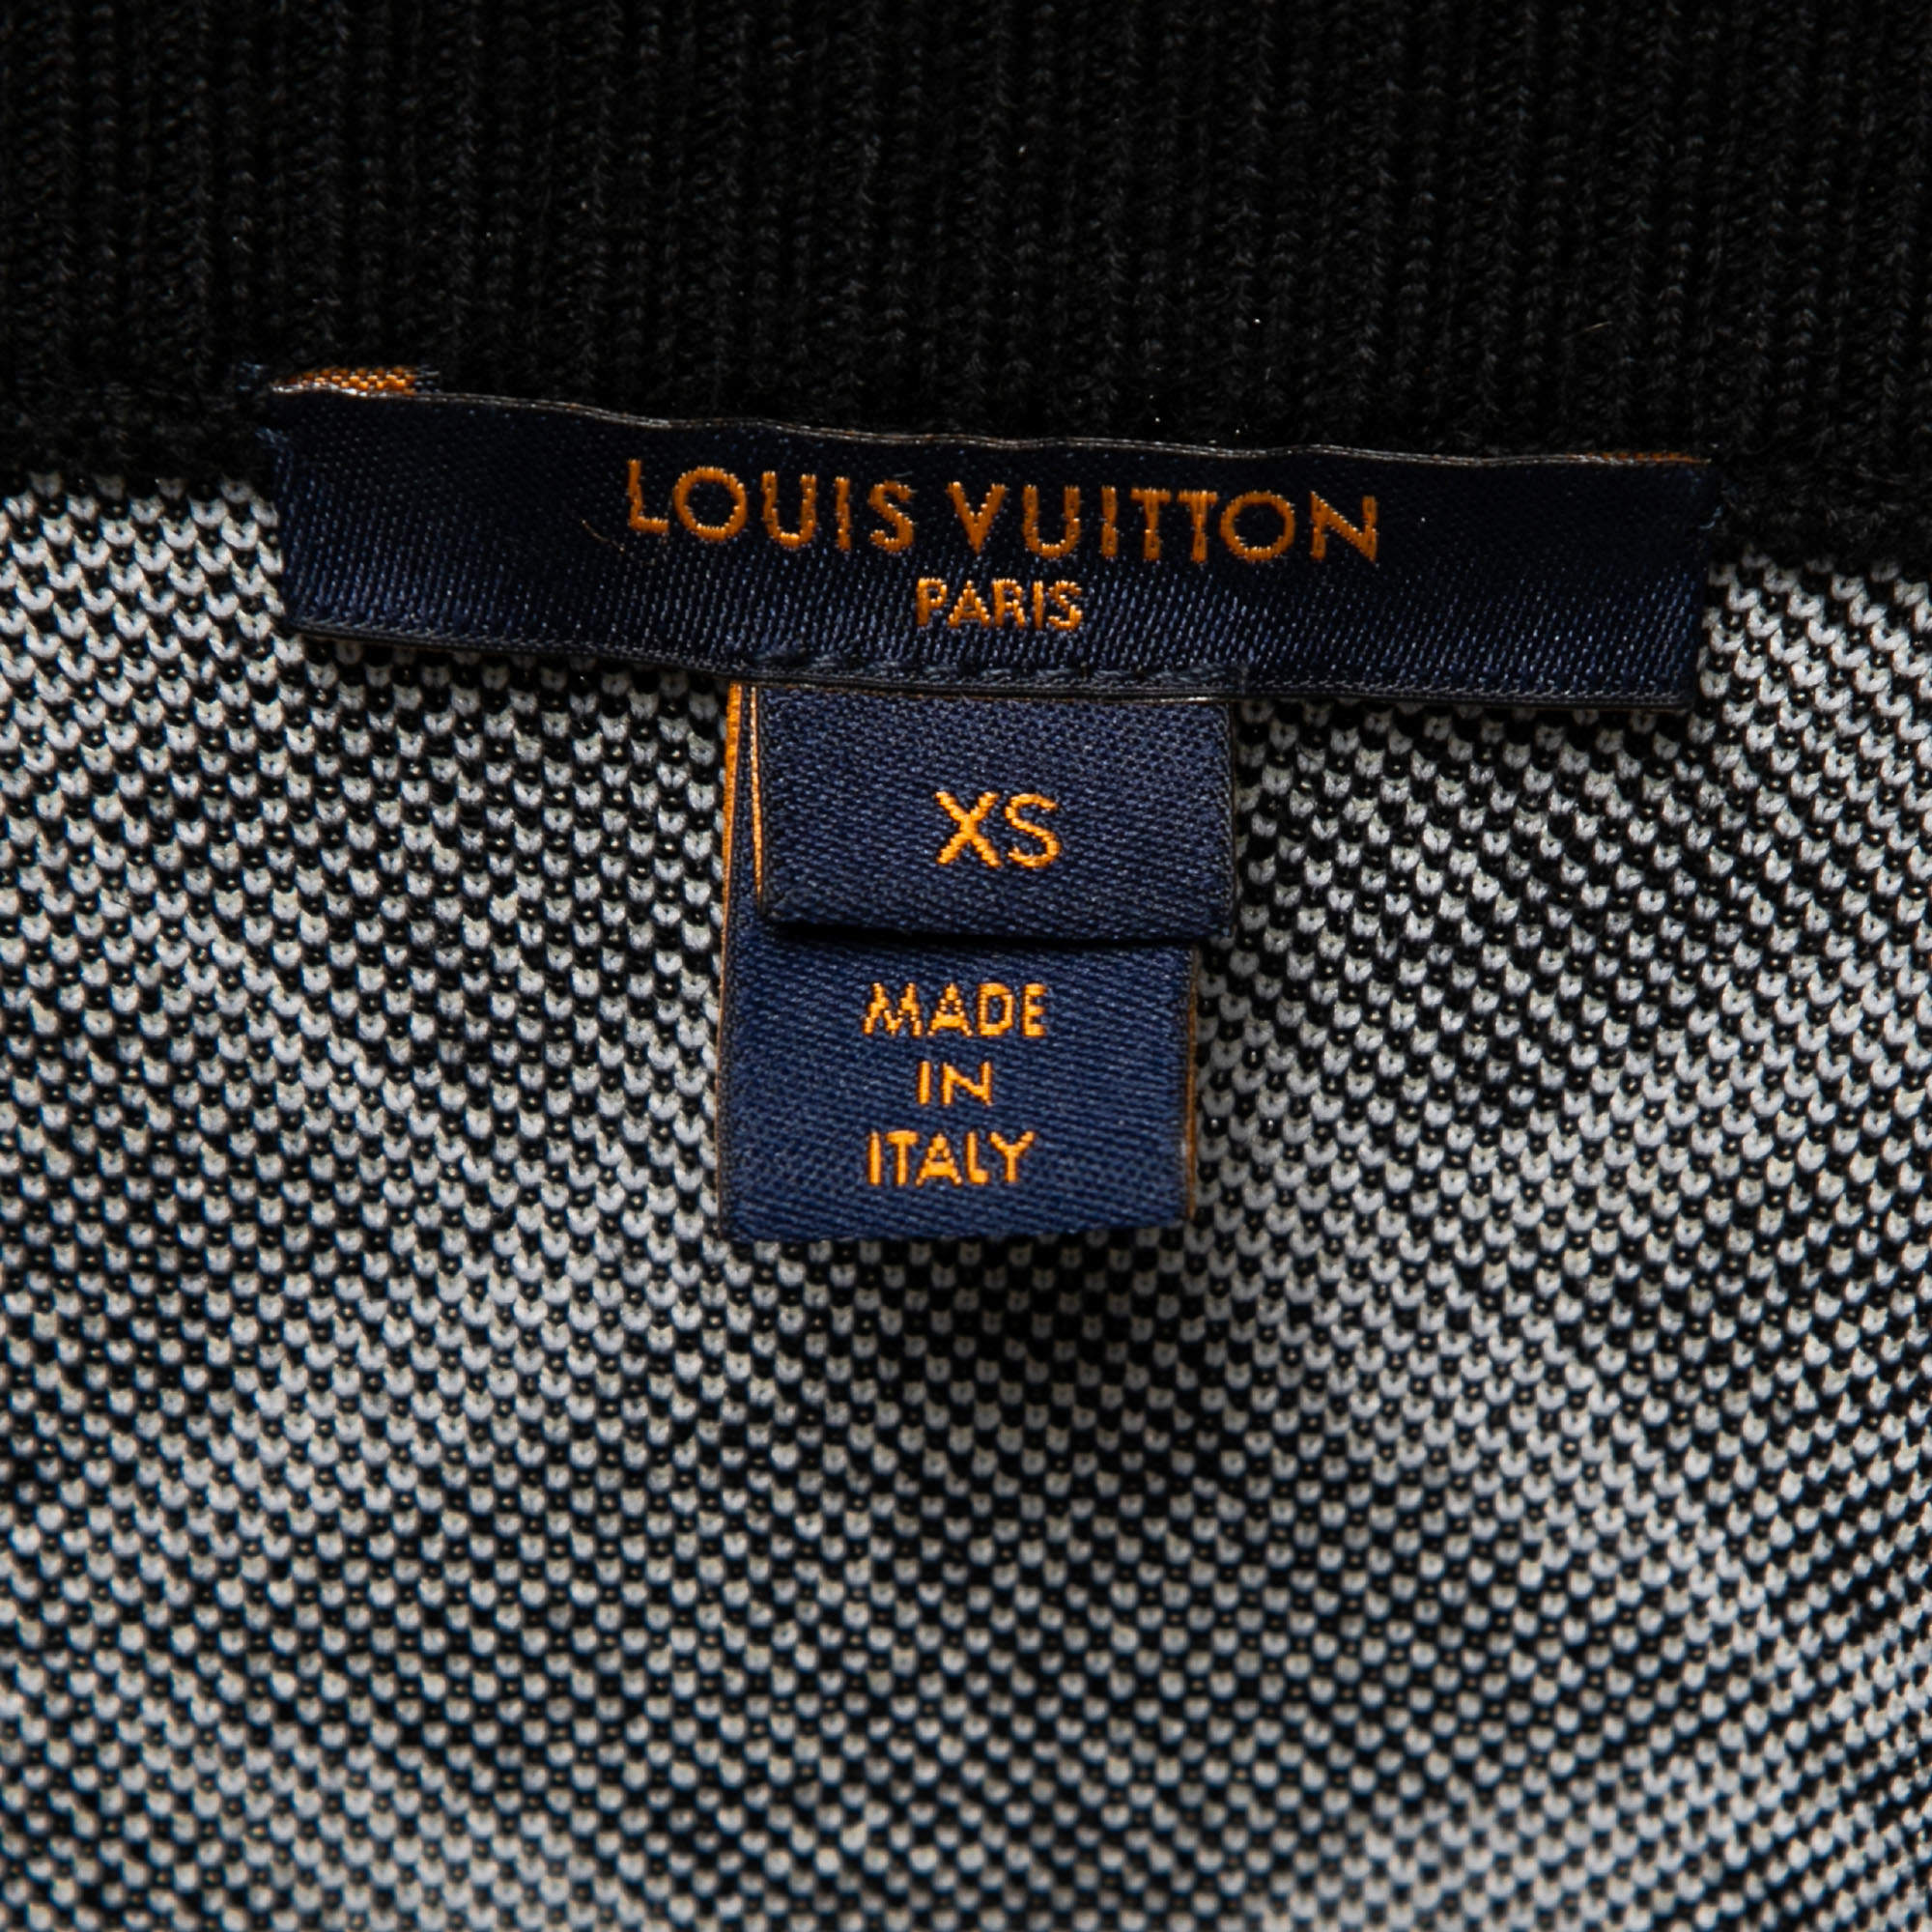 Louis Vuitton Women's Bomber Jacket Limited Edition Since 1854